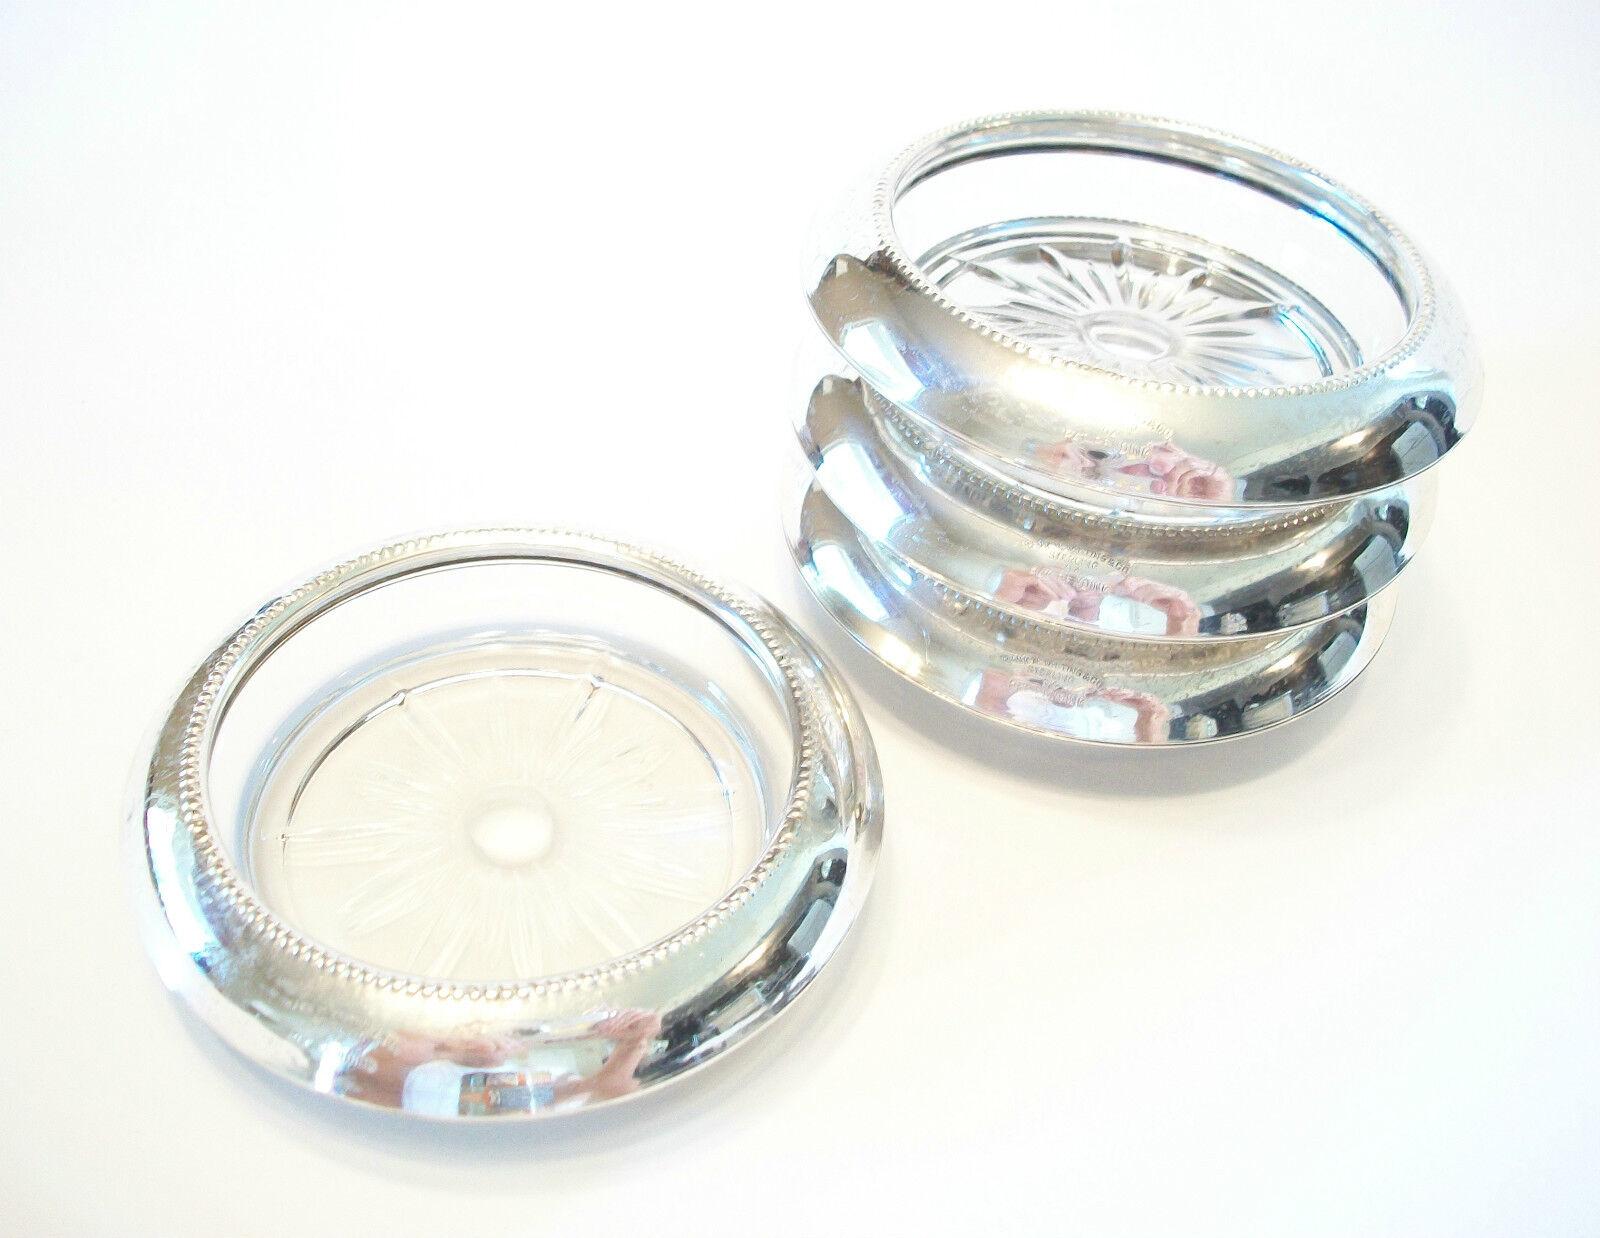 FRANK M. WHITING & CO. - Set of four vintage pressed glass coasters with sterling silver rims - stack-able - each signed - United States - mid 20th century.

Excellent vintage condition - minor dents & surface scratches from age and use - no loss -